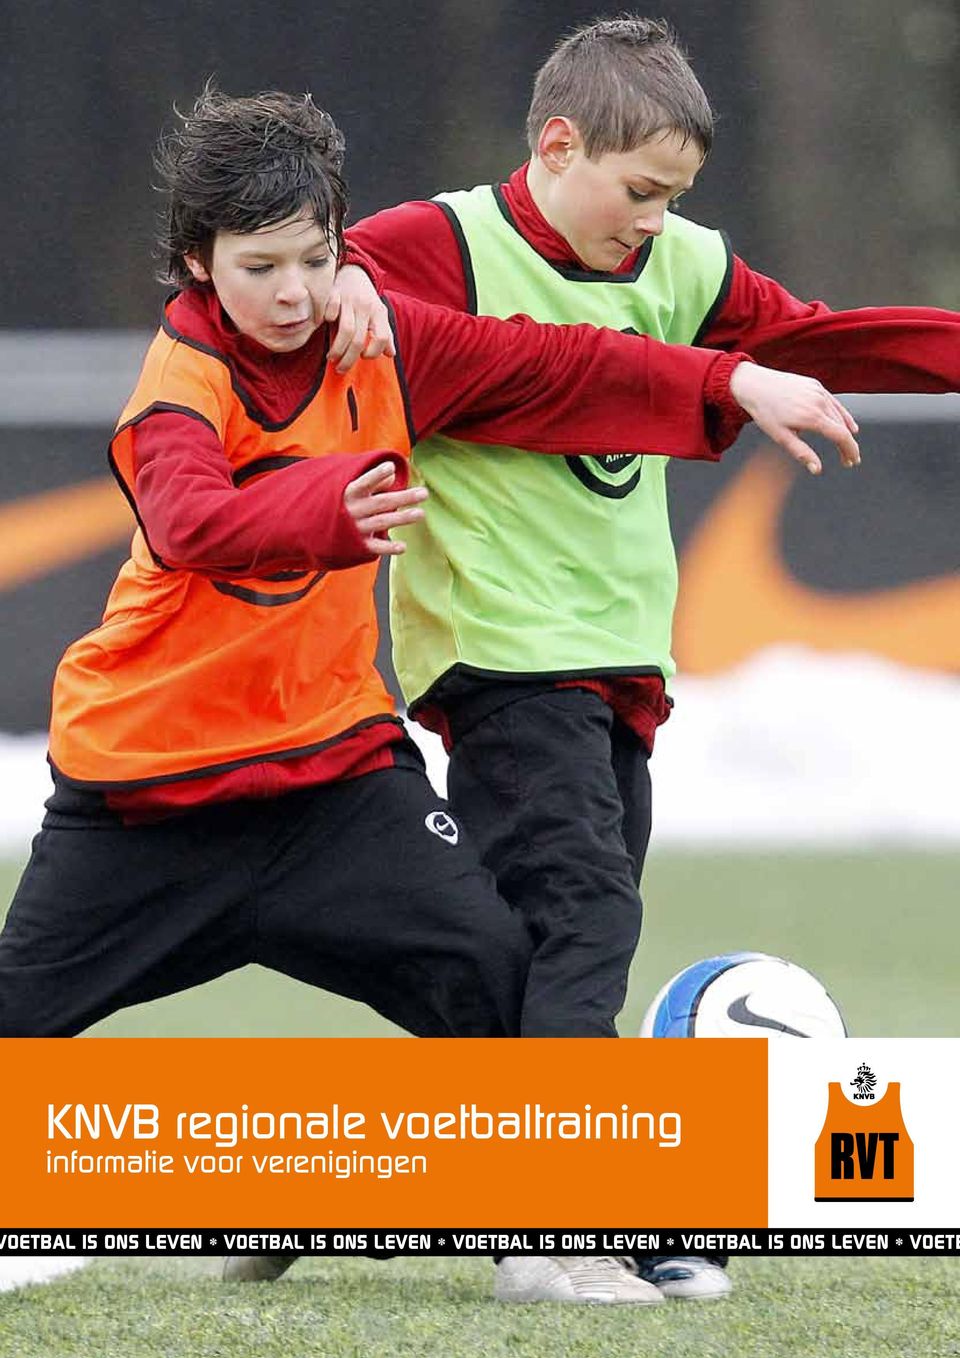 ONS LEVEN * VOETBAL IS ONS LEVEN *